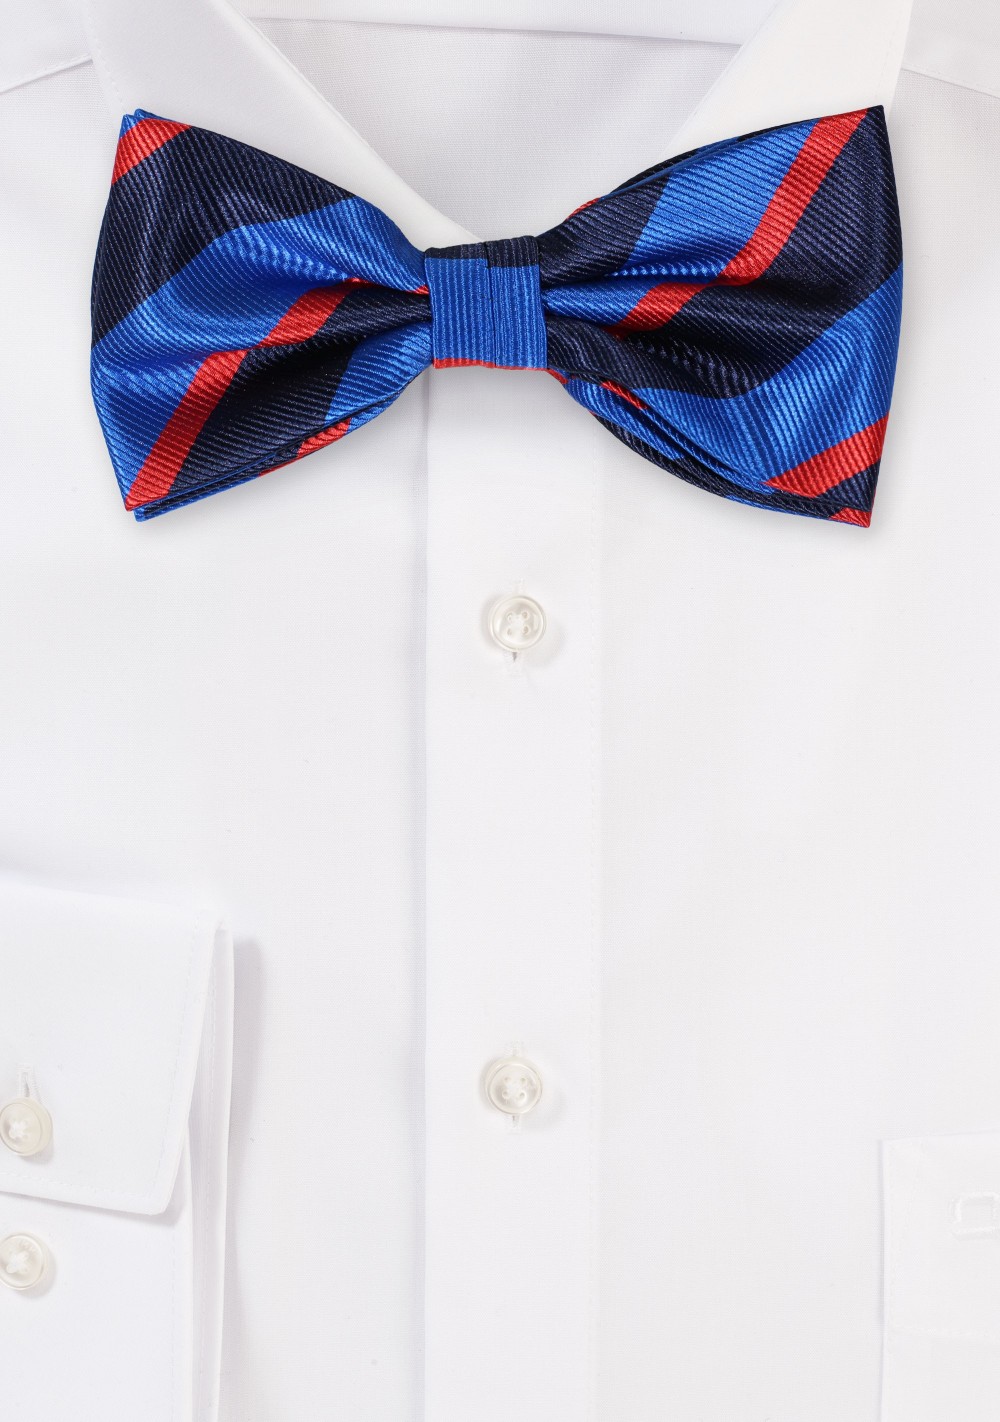 Navy and Red Repp Striped Bowtie